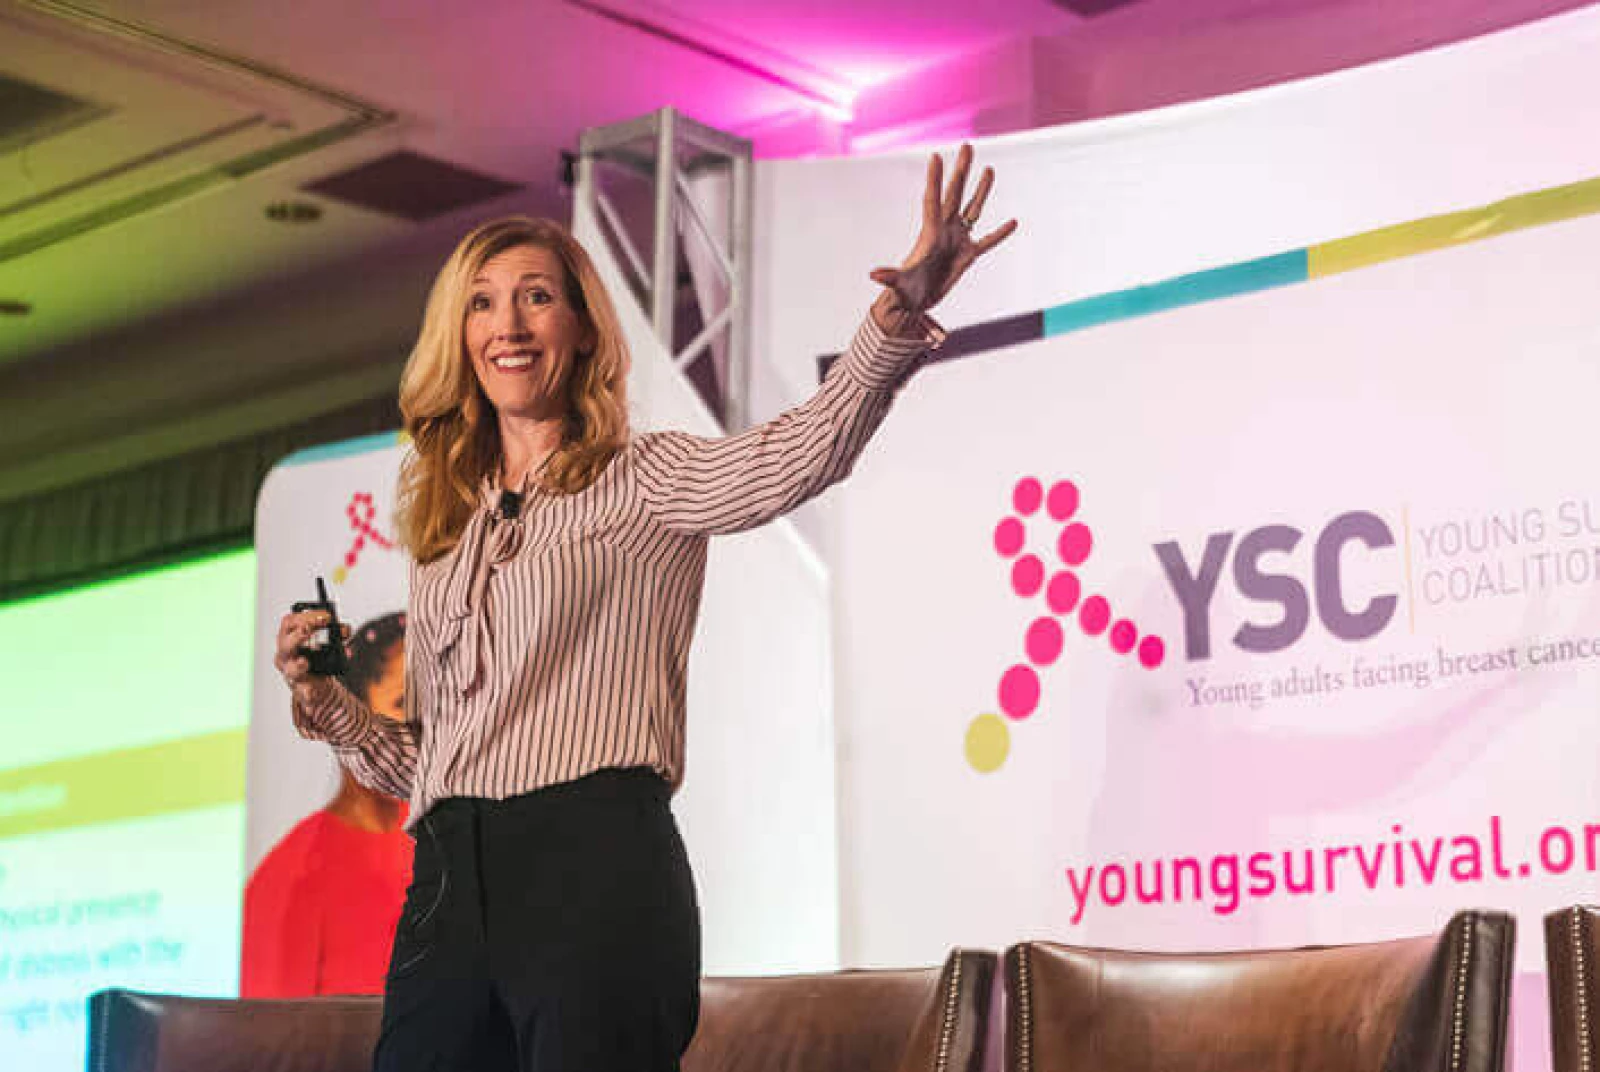 World-renowned experts share the latest research and medical treatment updates at the YSC Summit